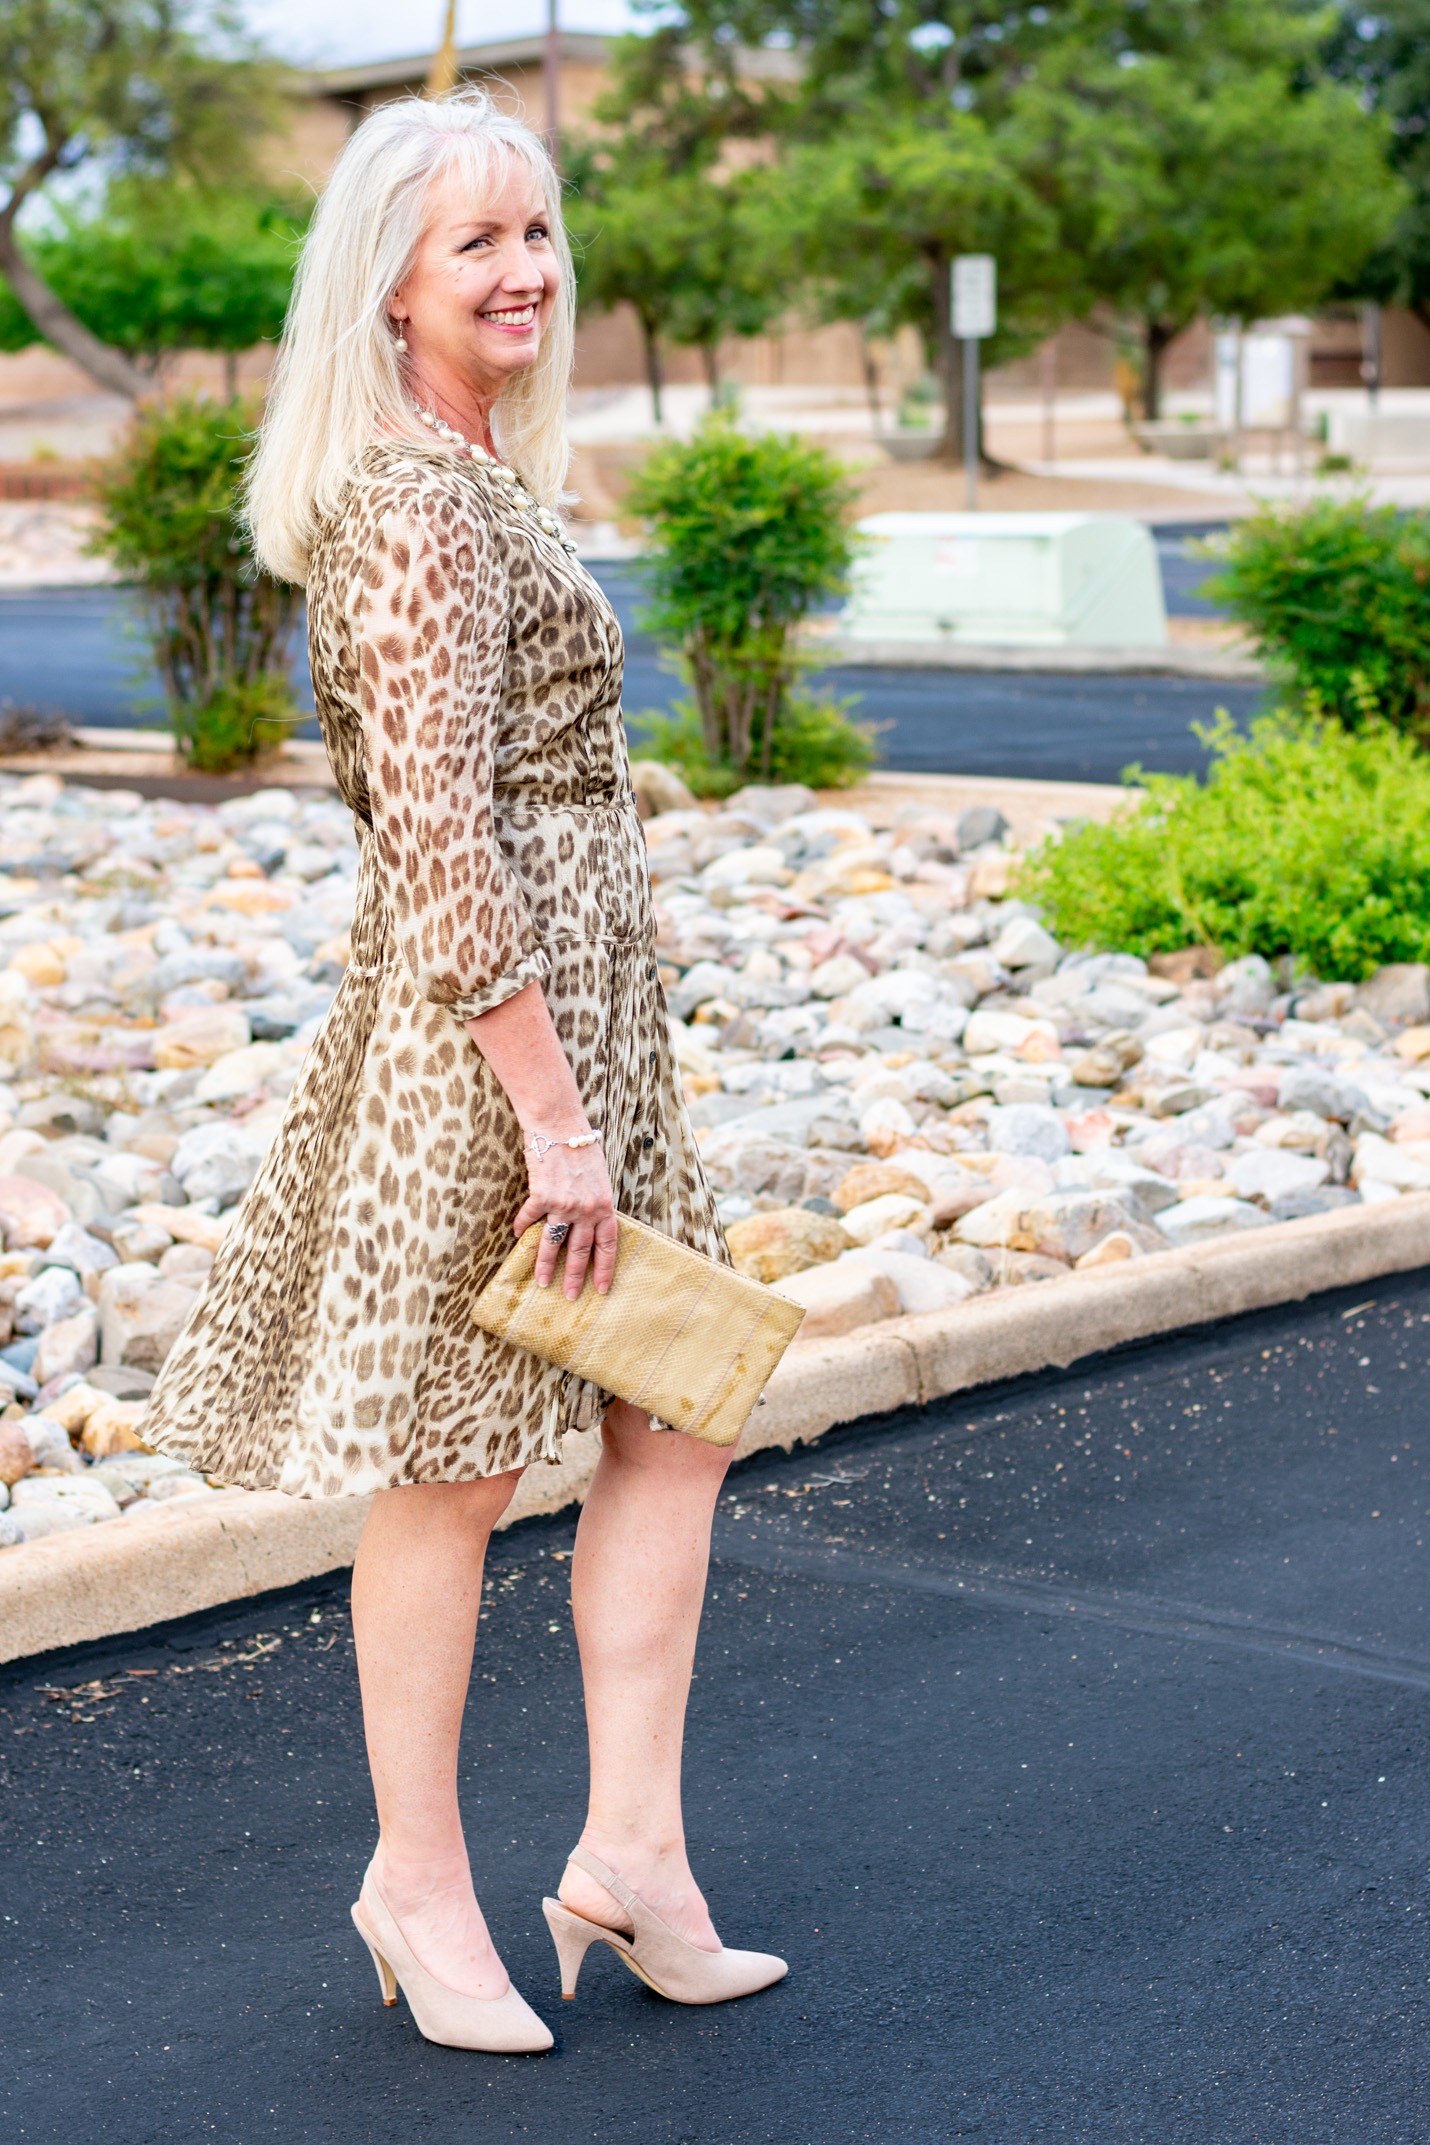 10 Tips for Wearing Leopard Print Without Going Wild